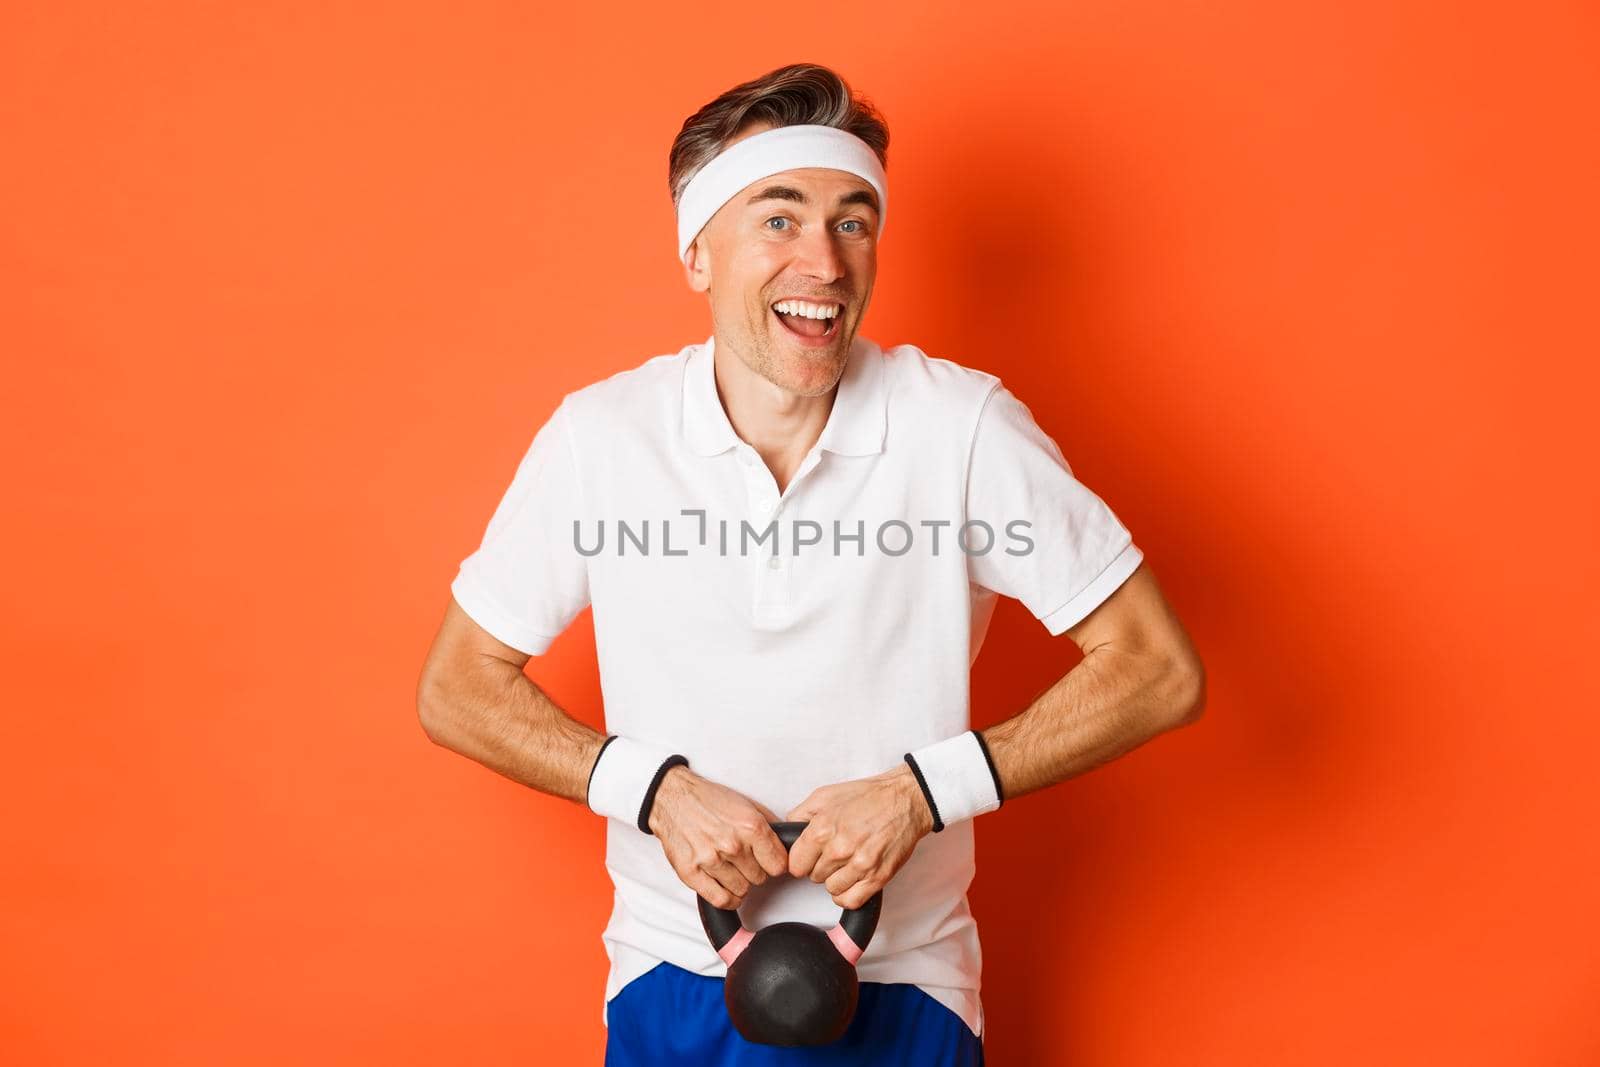 Concept of workout, gym and lifestyle. Image of handsome middle-aged guy doing sport exercises, lifting kettlebell and smiling, standing over orange background.